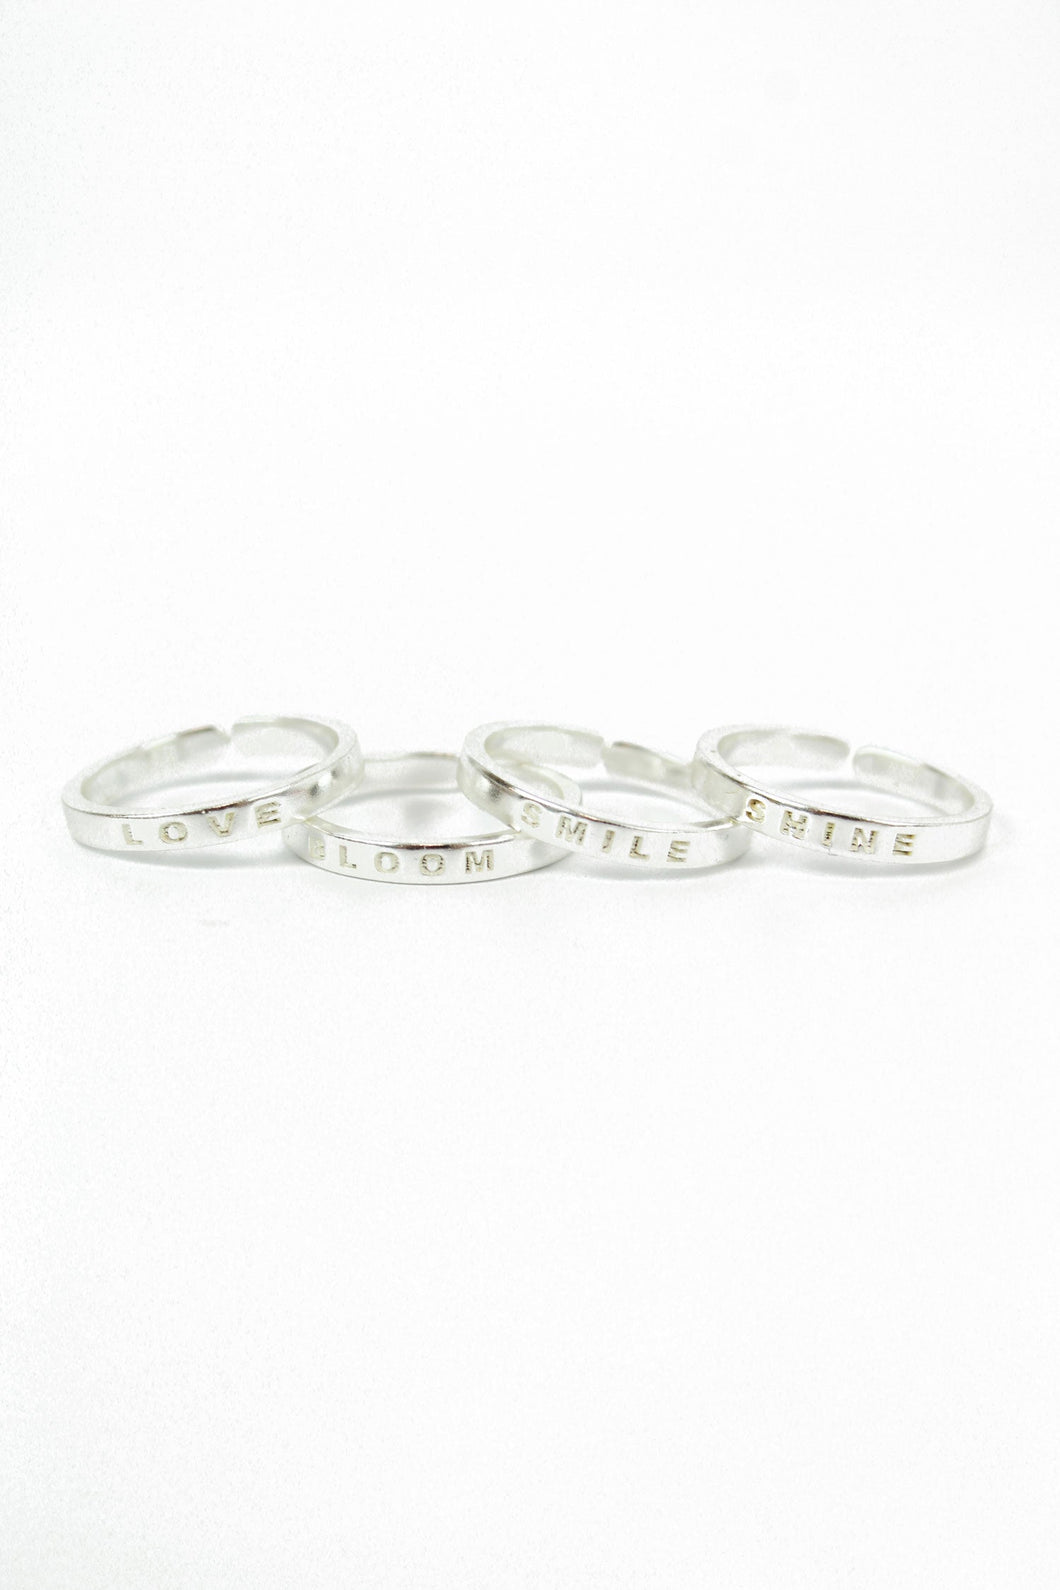 My Doris Quote Rings - Silver & Gold